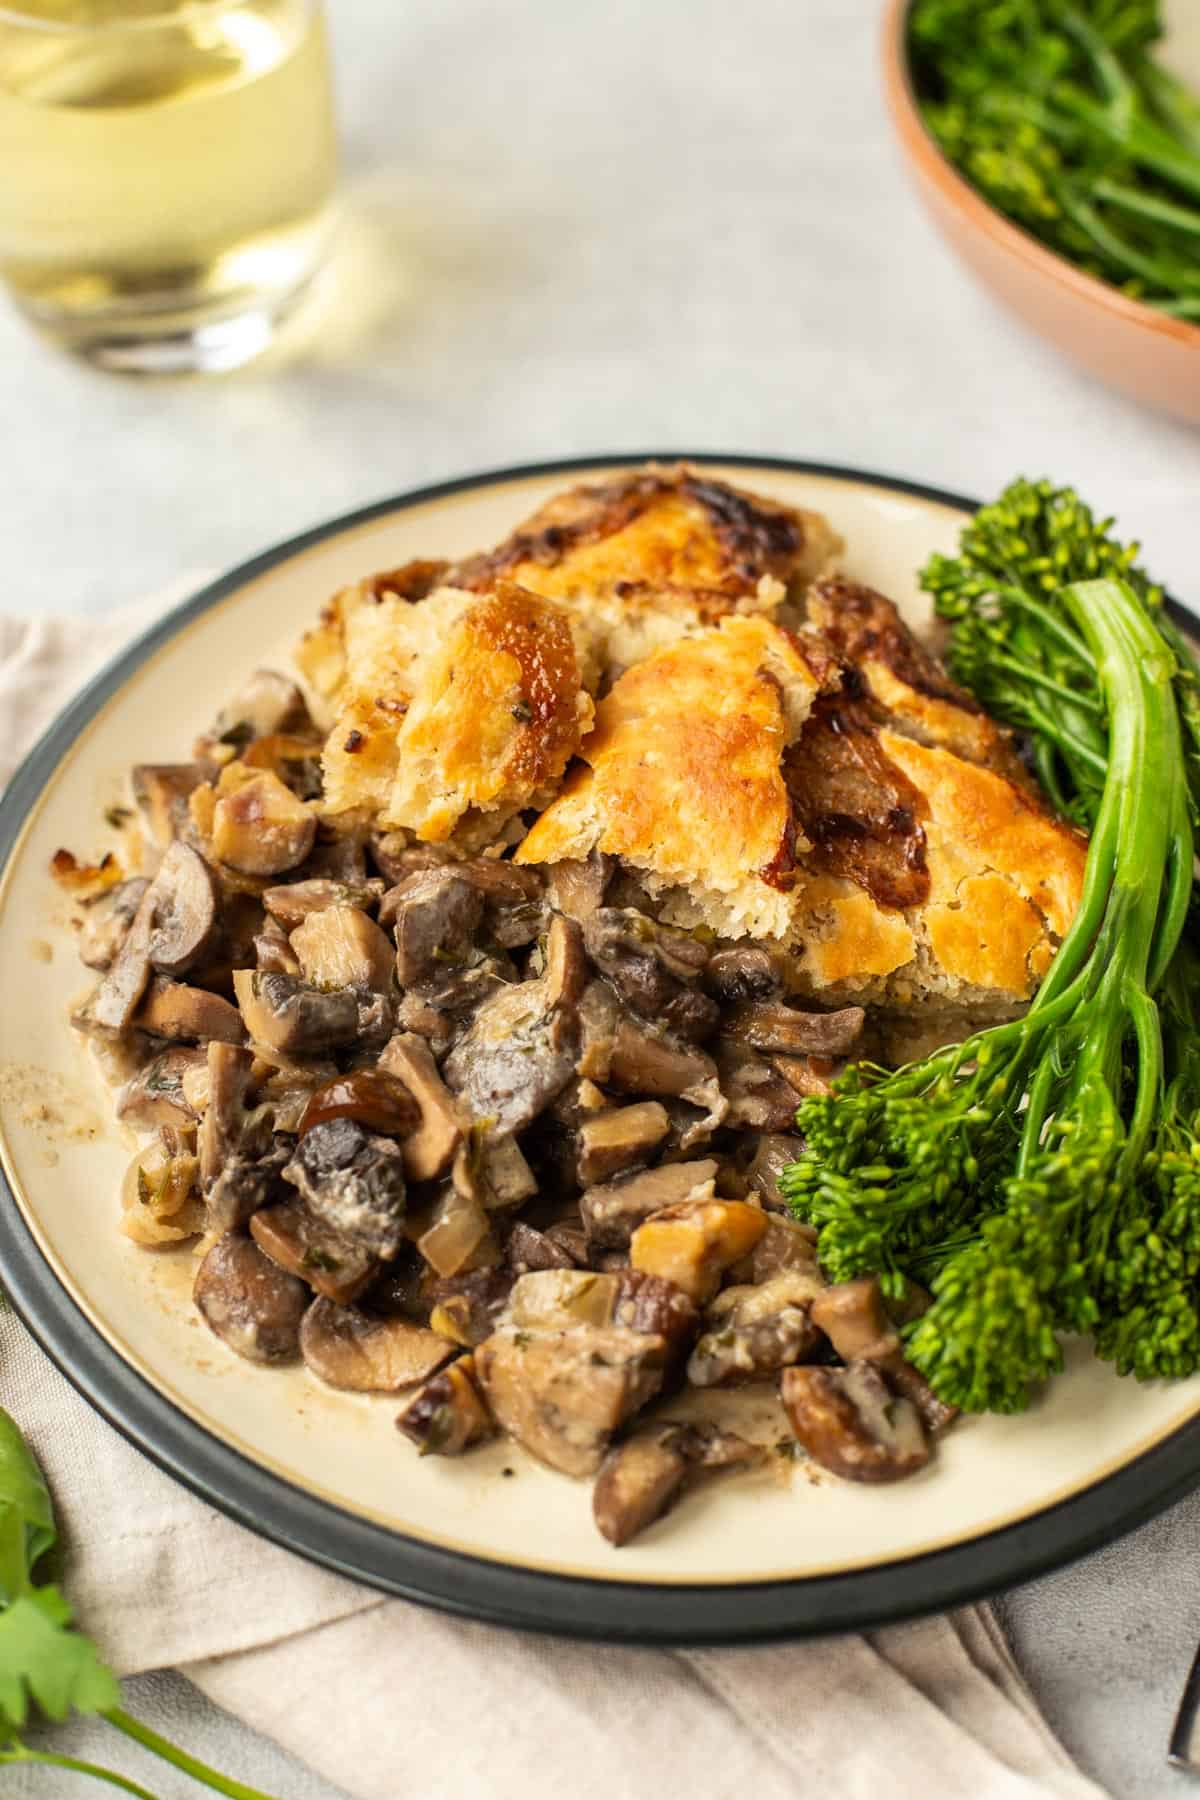 Chestnut and mushroom pie with suet crust and broccoli.